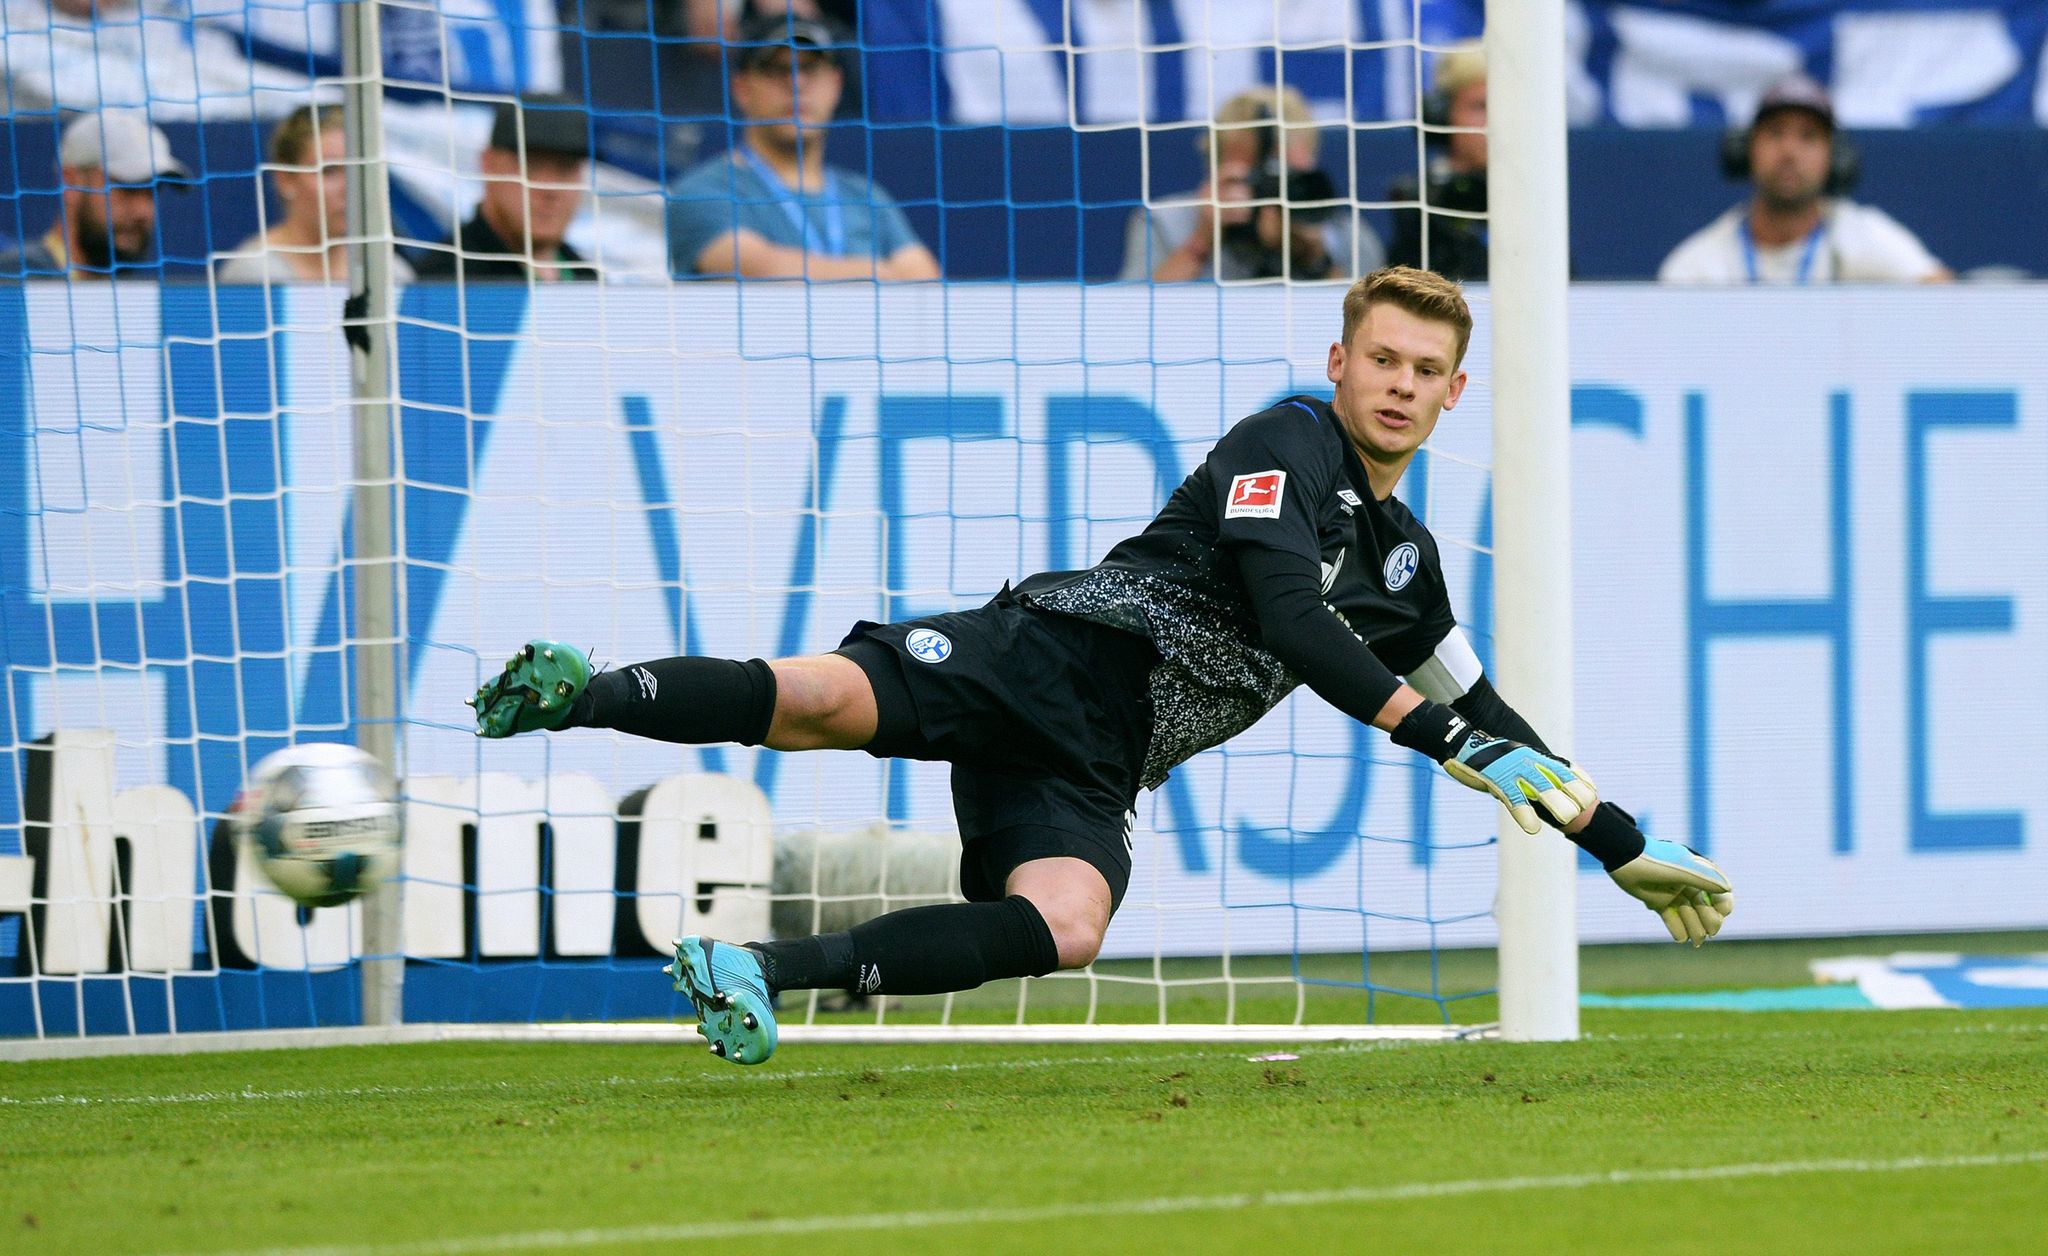 (FILES) In this file photo taken on August 24, 2019 Schalkes German goalkeeper Alexander Nuebel fails to save Bayern Munichs Polish forward Robert Lewandowskis penalty during the German first division Bundesliga football match FC Schalke 04 FC Bayern Munich in Gelsenkirchen, western Germany. - Goalkeeper Alexander Nuebel has agreed to join Bayern Munich on a free transfer becoming he latest potential successor to Manuel <HIT>Neuer</HIT>, the club announced on January 04, 2020. (Photo by UWE KRAFT / AFP) / RESTRICTIONS: DFL REGULATIONS PROHIBIT ANY USE OF PHOTOGRAPHS AS IMAGE SEQUENCES AND/OR QUASI-VIDEO